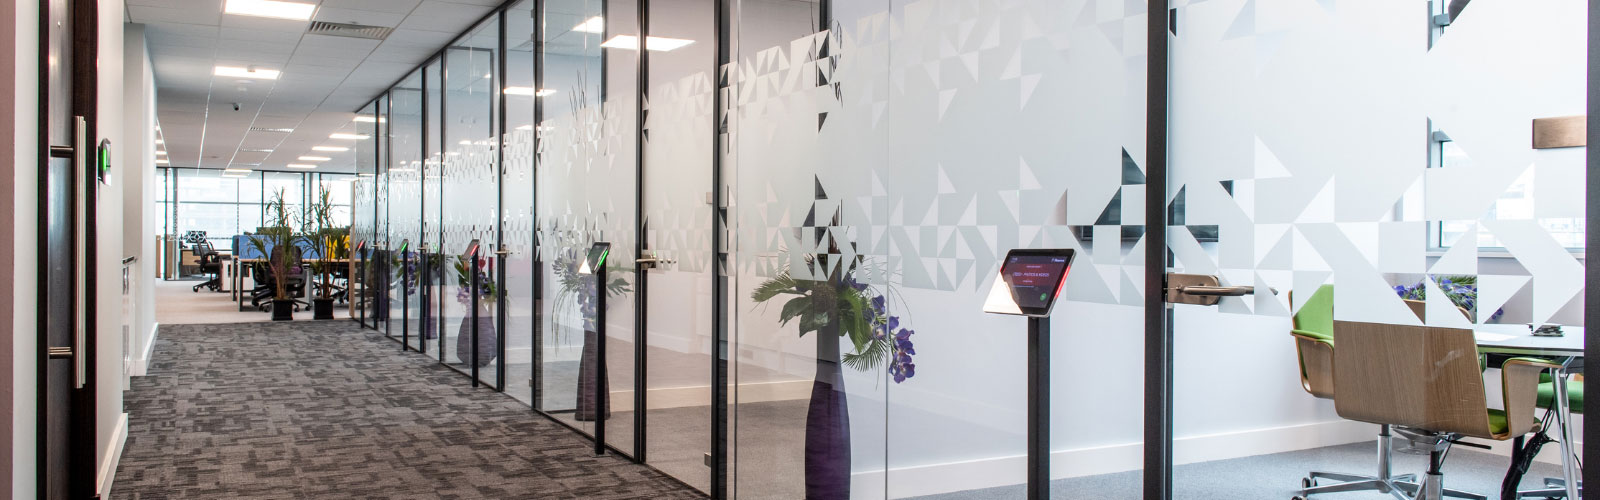 Modern office corridor with conference rooms using technology 